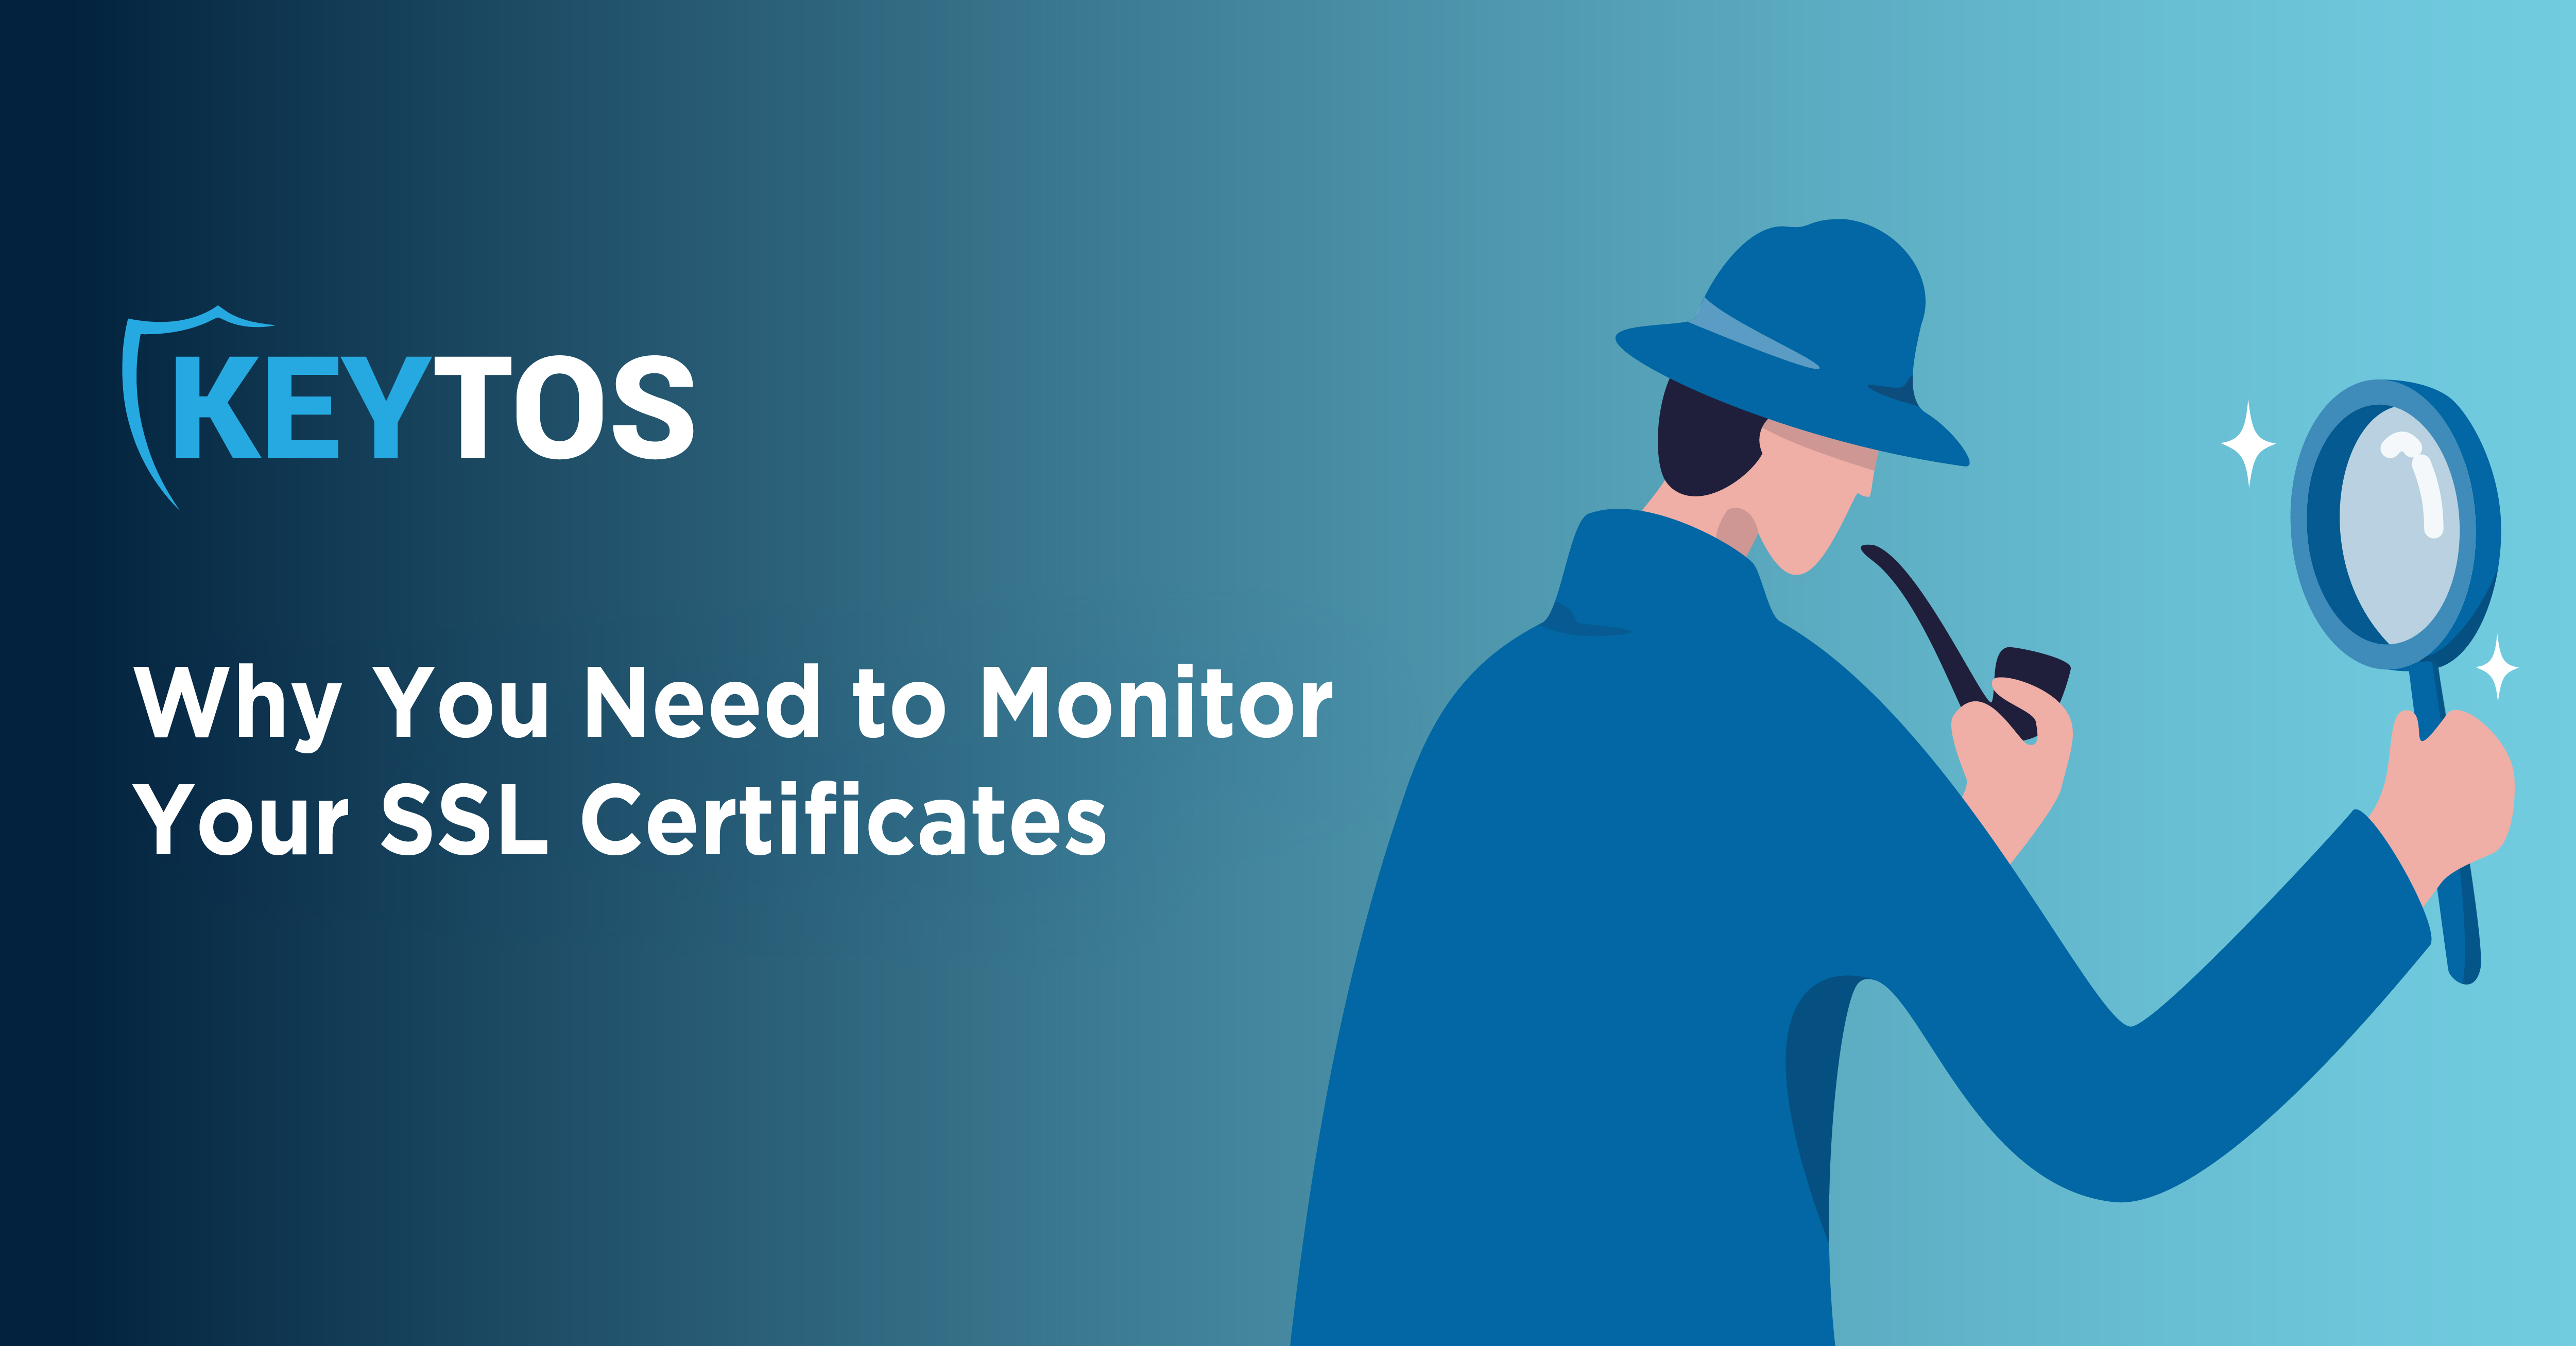 What is SSL Certificate Monitoring? Why is SSL Certificate Monitoring Important?